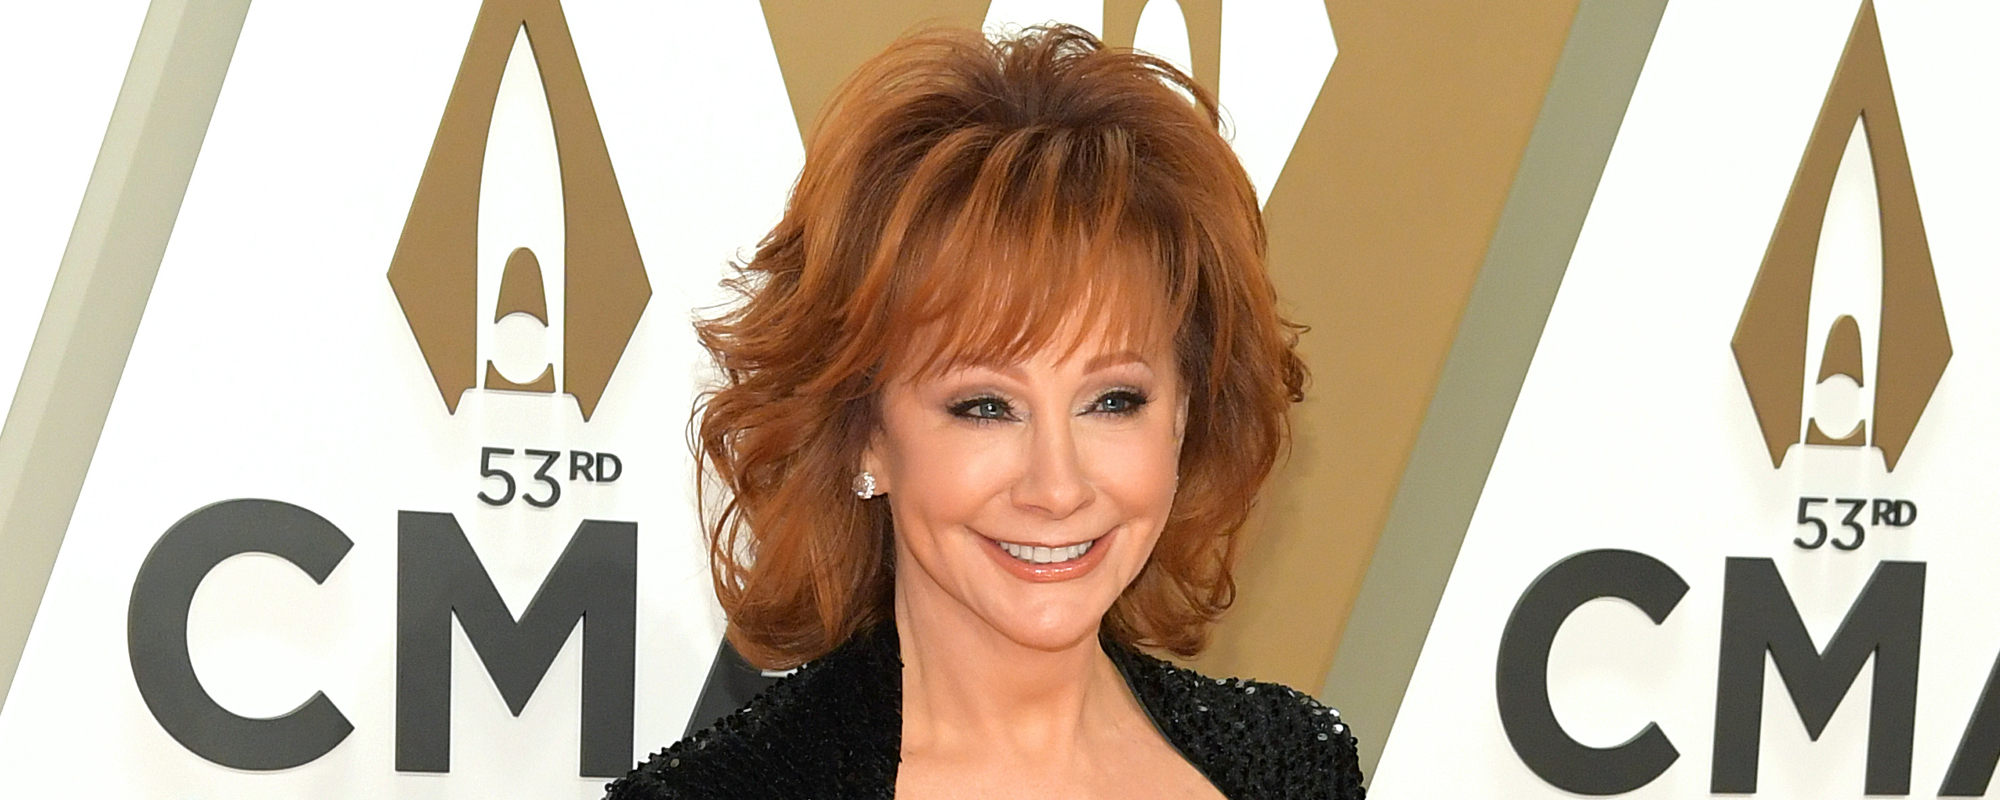 ‘The Voice’ Star Reba McEntire Sends Assuring Message to New Coaches Snoop Dogg and Michael Bublé